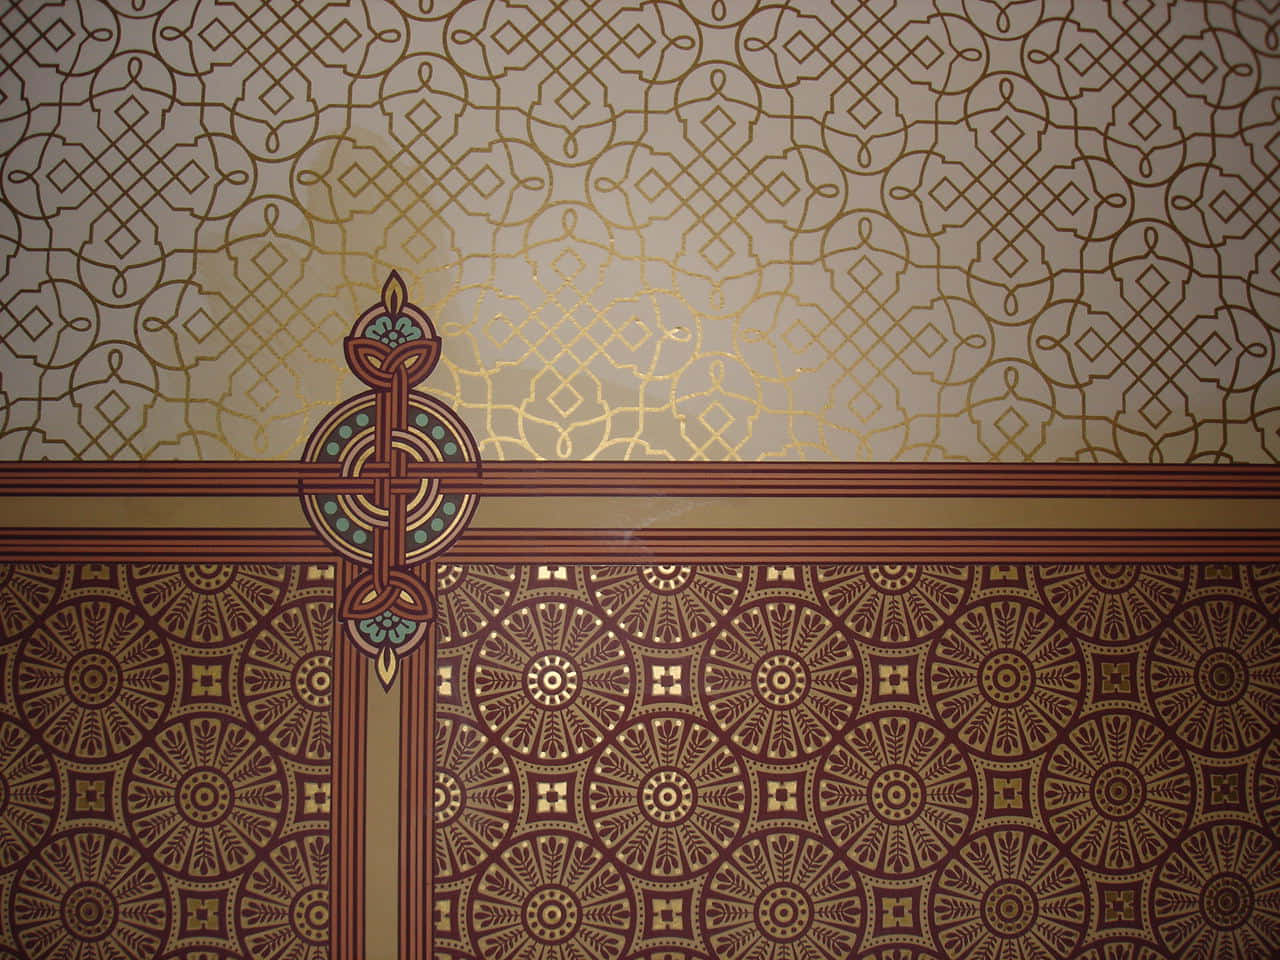 A stunning example of Art Nouveau style Wallpaper